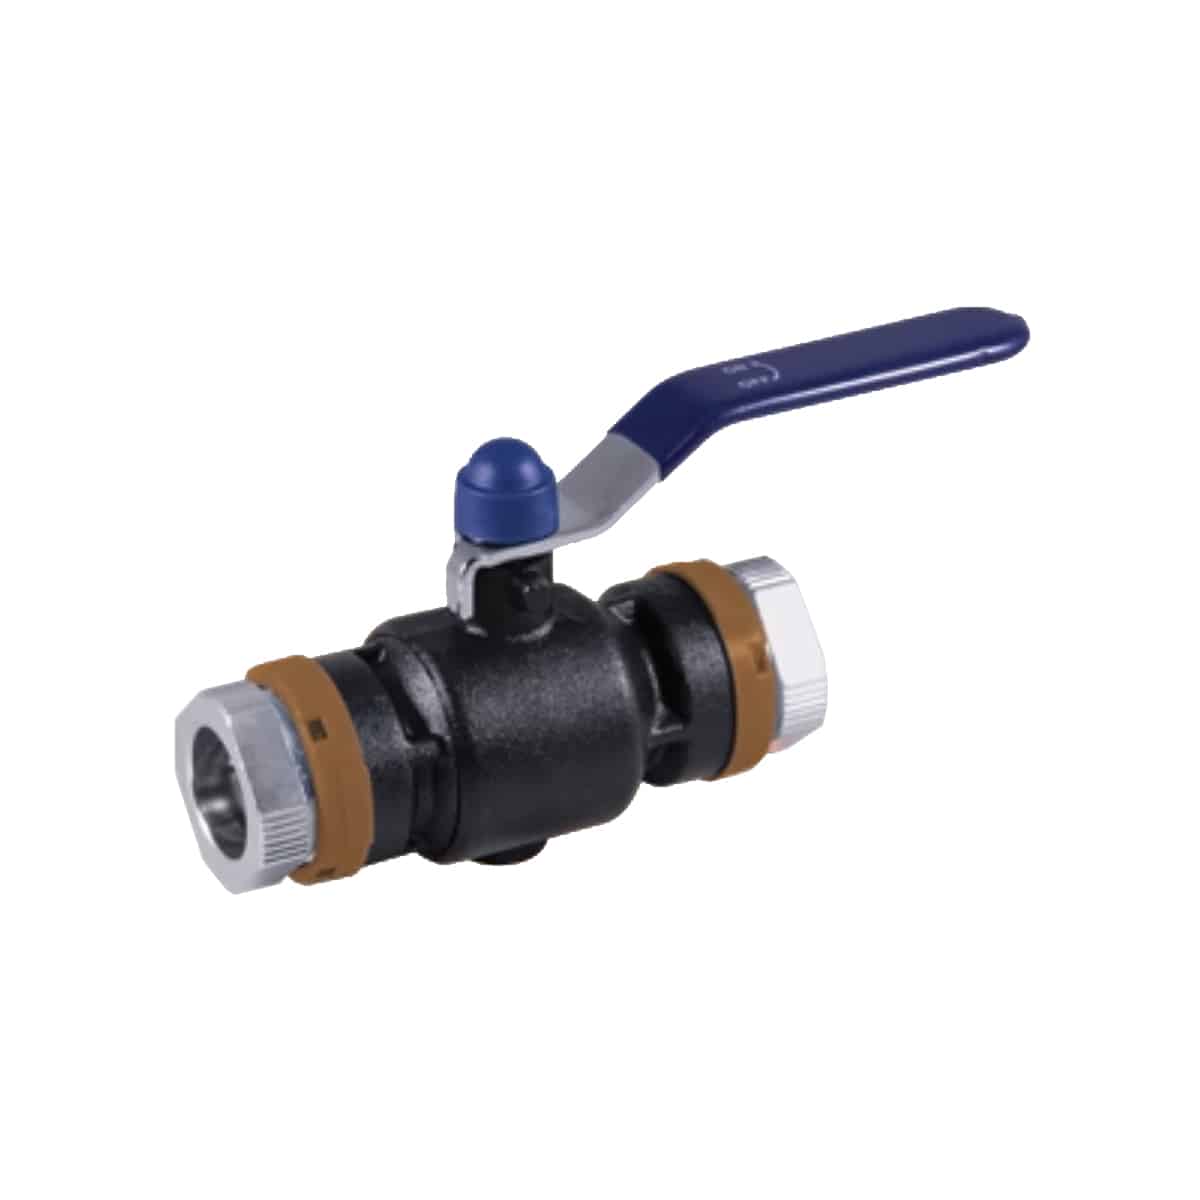 OIL Ball Valve – (pipe x pipe) – 600 PSI Rated